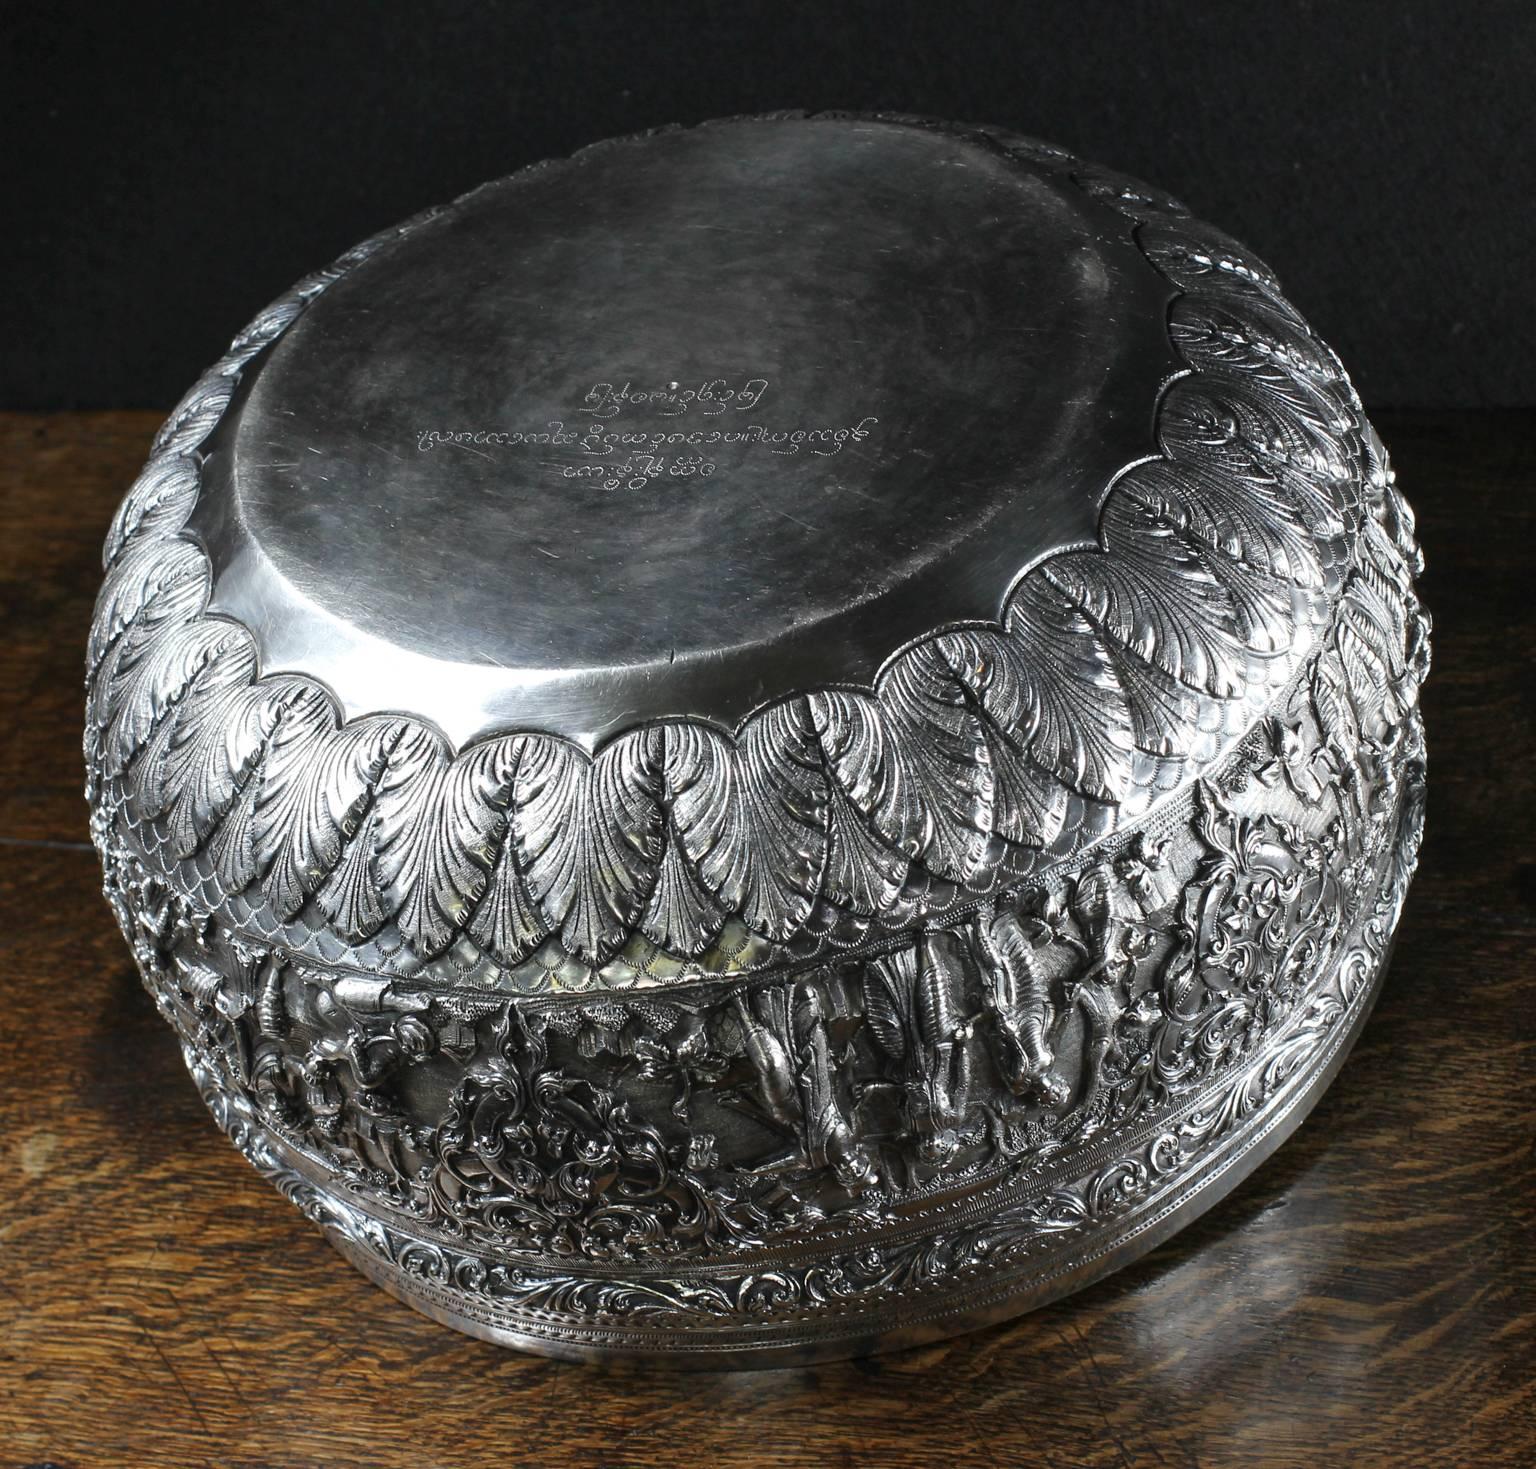 Massive Burmese Silver Bowl, Detailed Scenes and Dedication Beneath, circa 1850 In Excellent Condition For Sale In Geelong, Victoria